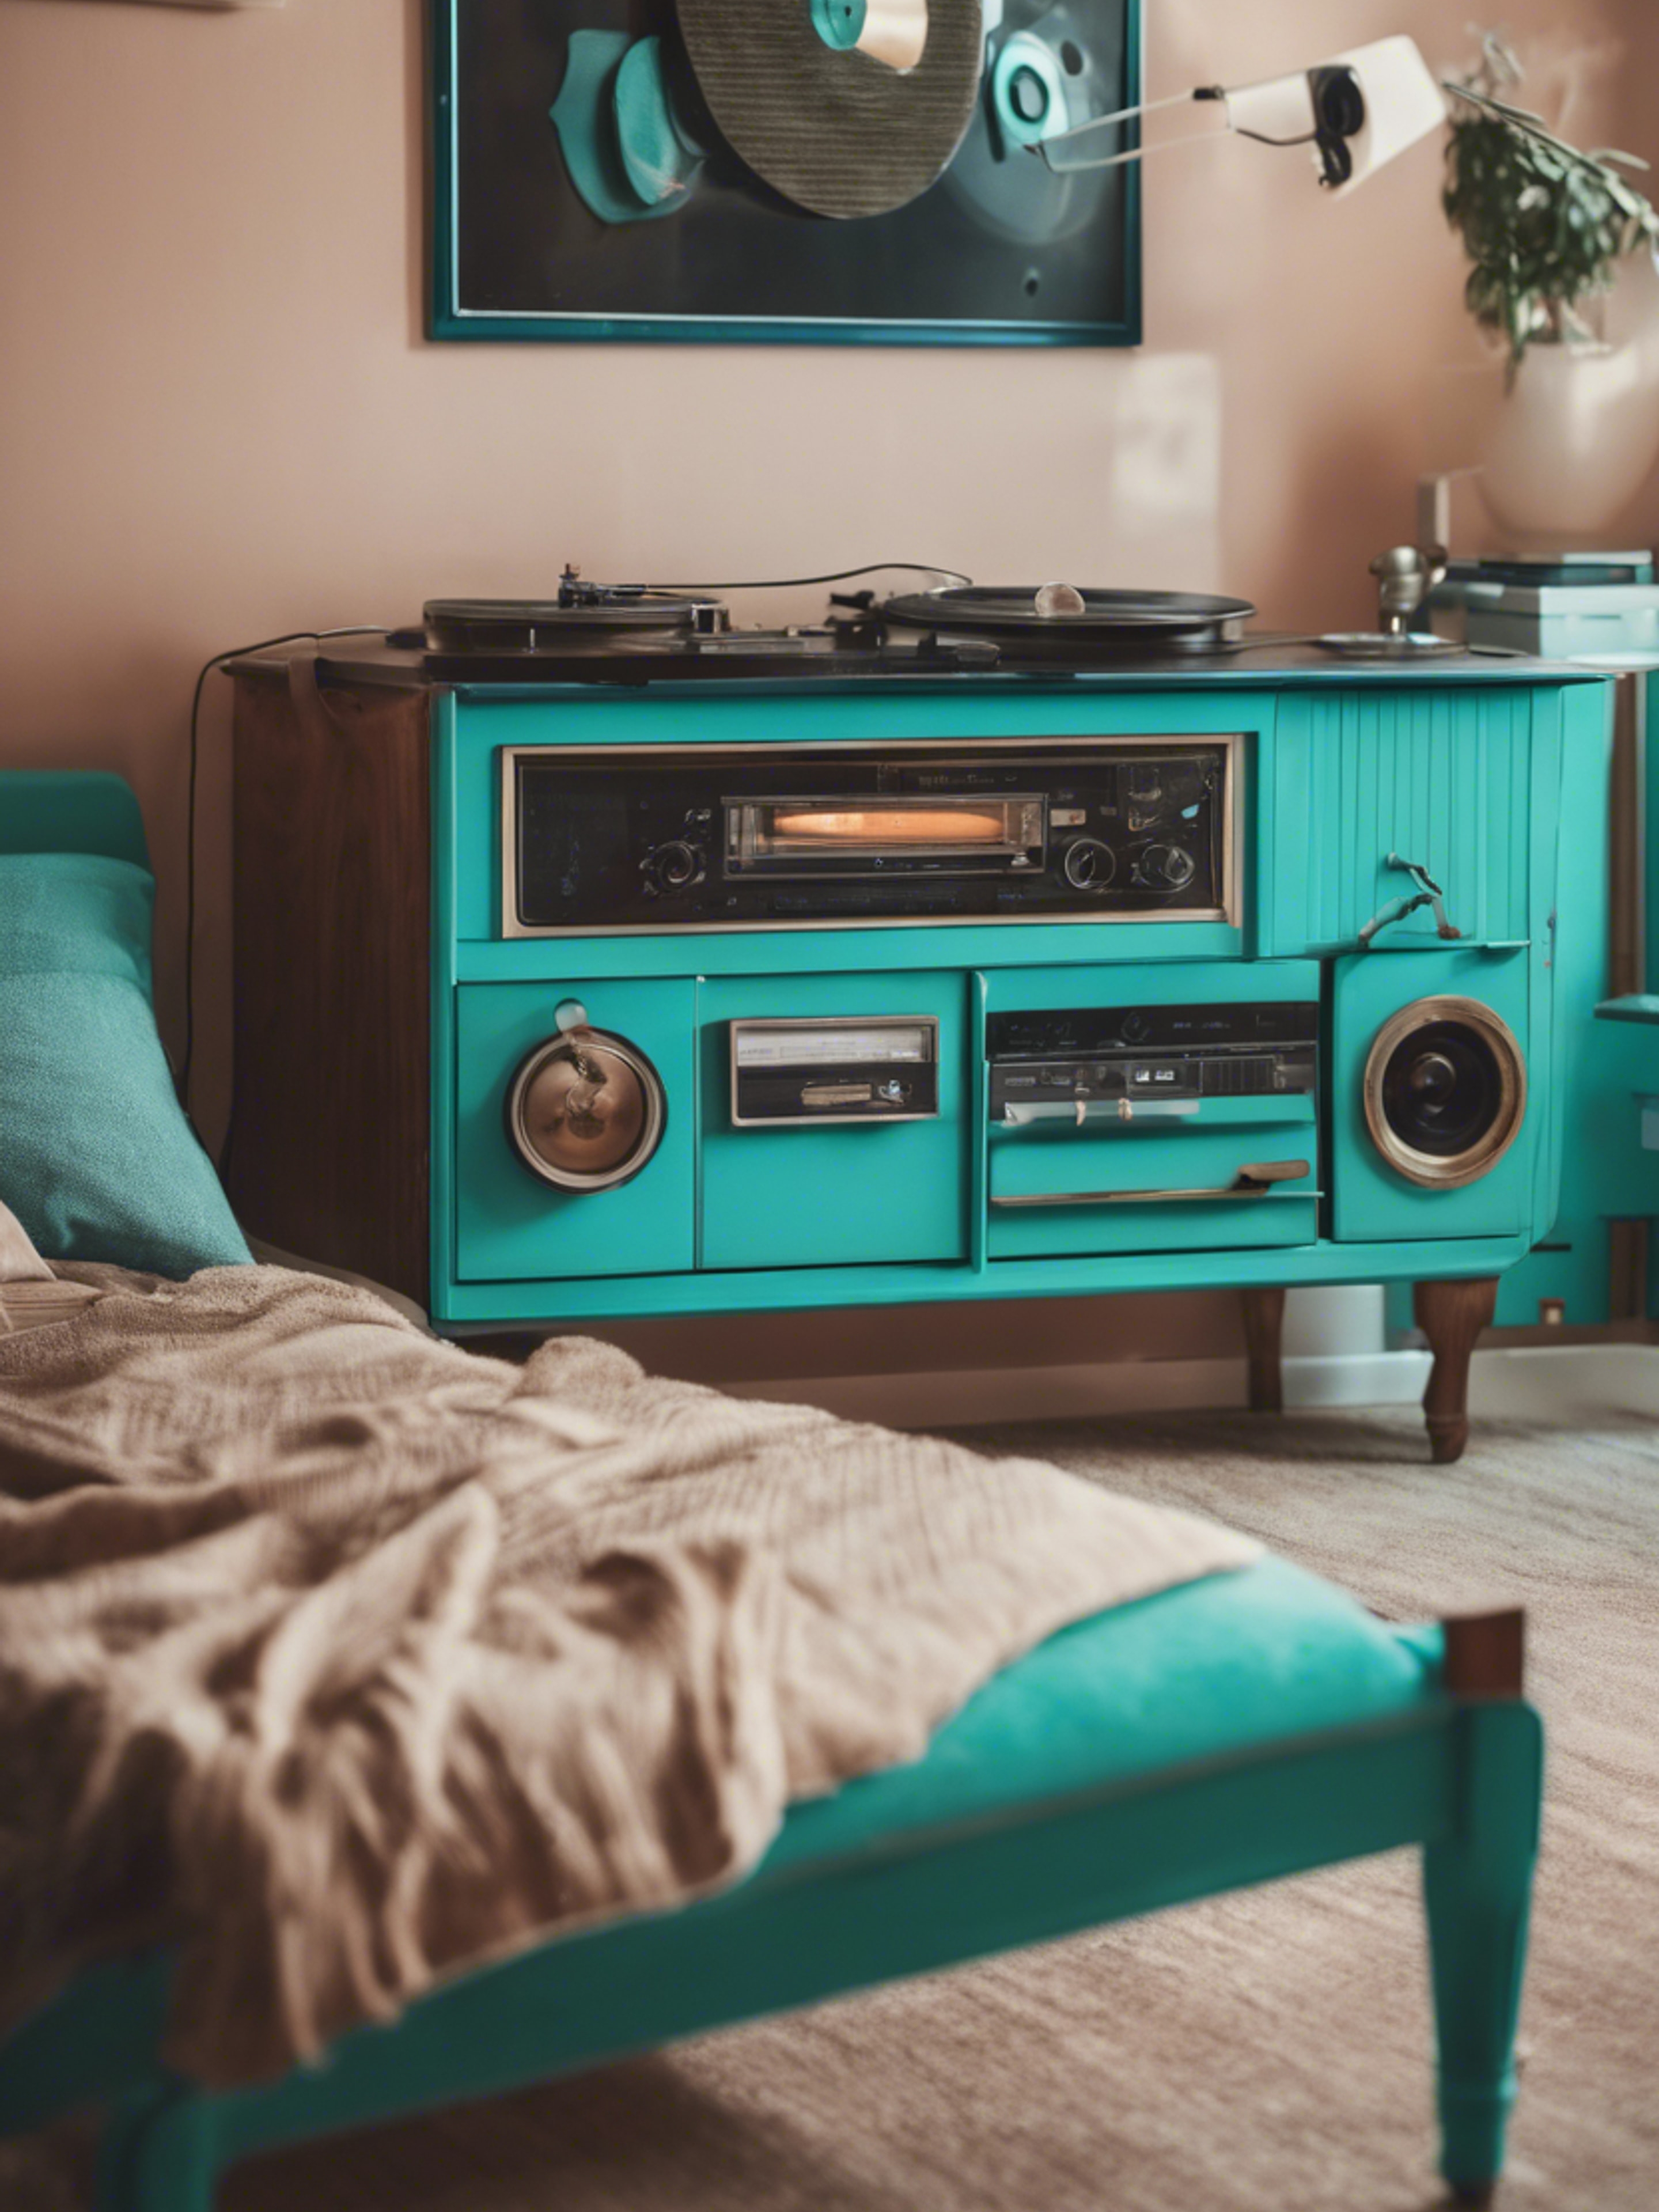 A turquoise retro bedroom with vintage furniture and record players壁紙[9d05420ae9754c17b49a]